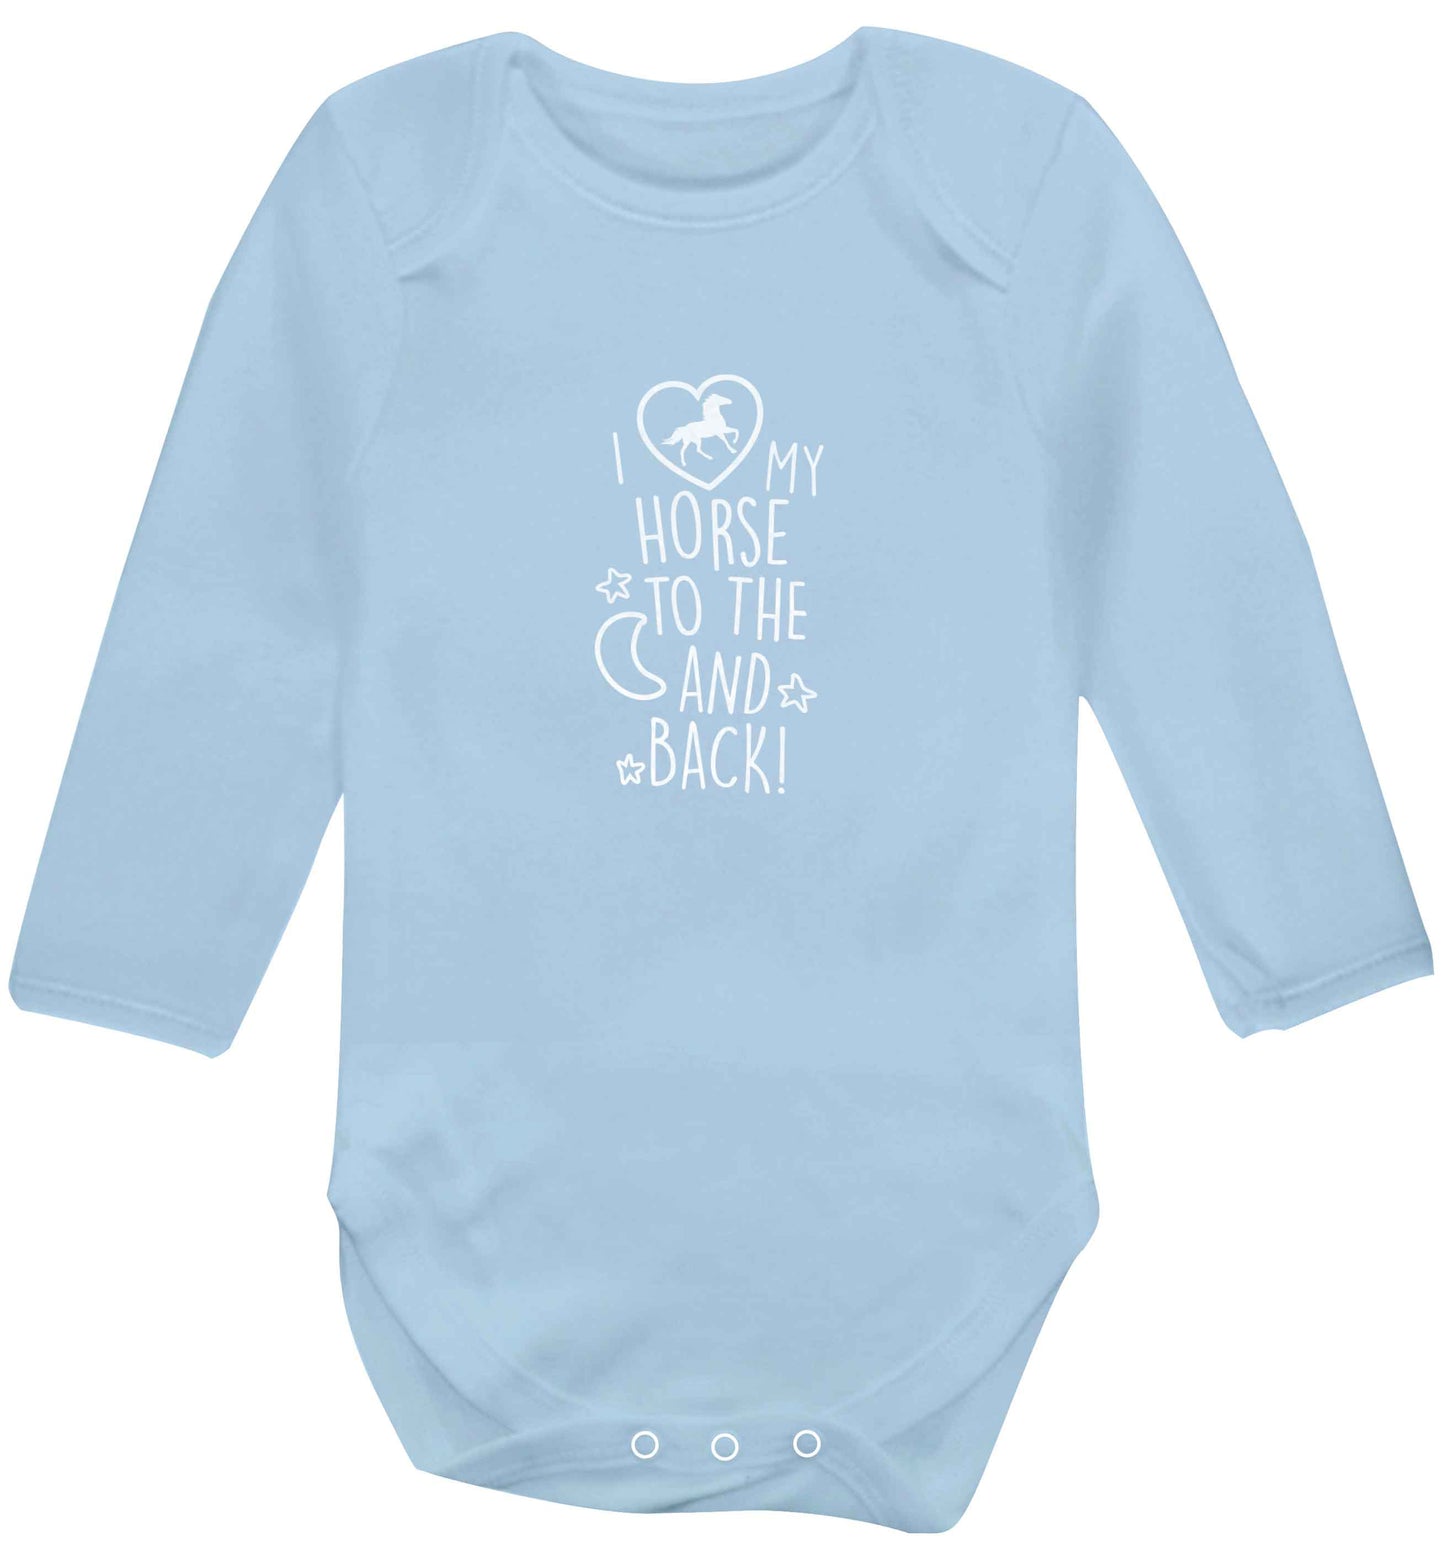 I love my horse to the moon and back baby vest long sleeved pale blue 6-12 months